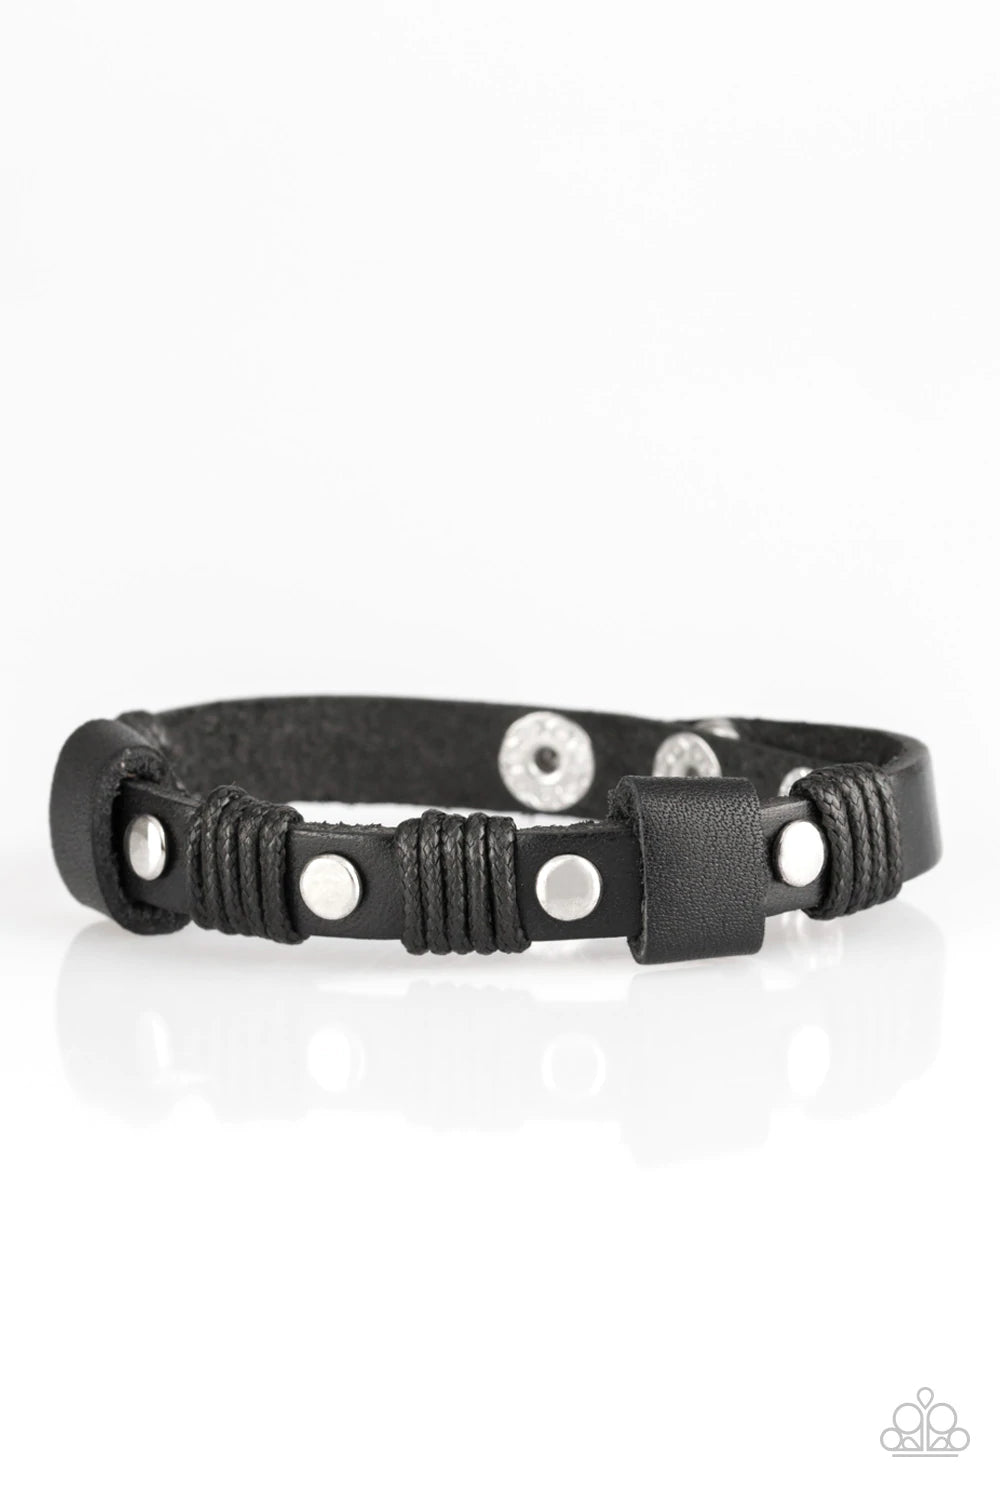 Paparazzi Accessories Road Burner - Black Infused with shimmery silver studs, strips of black twine and leather laces wrap around a black leather band for a rugged look. Features an adjustable snap closure. Sold as one individual bracelet. Jewelry